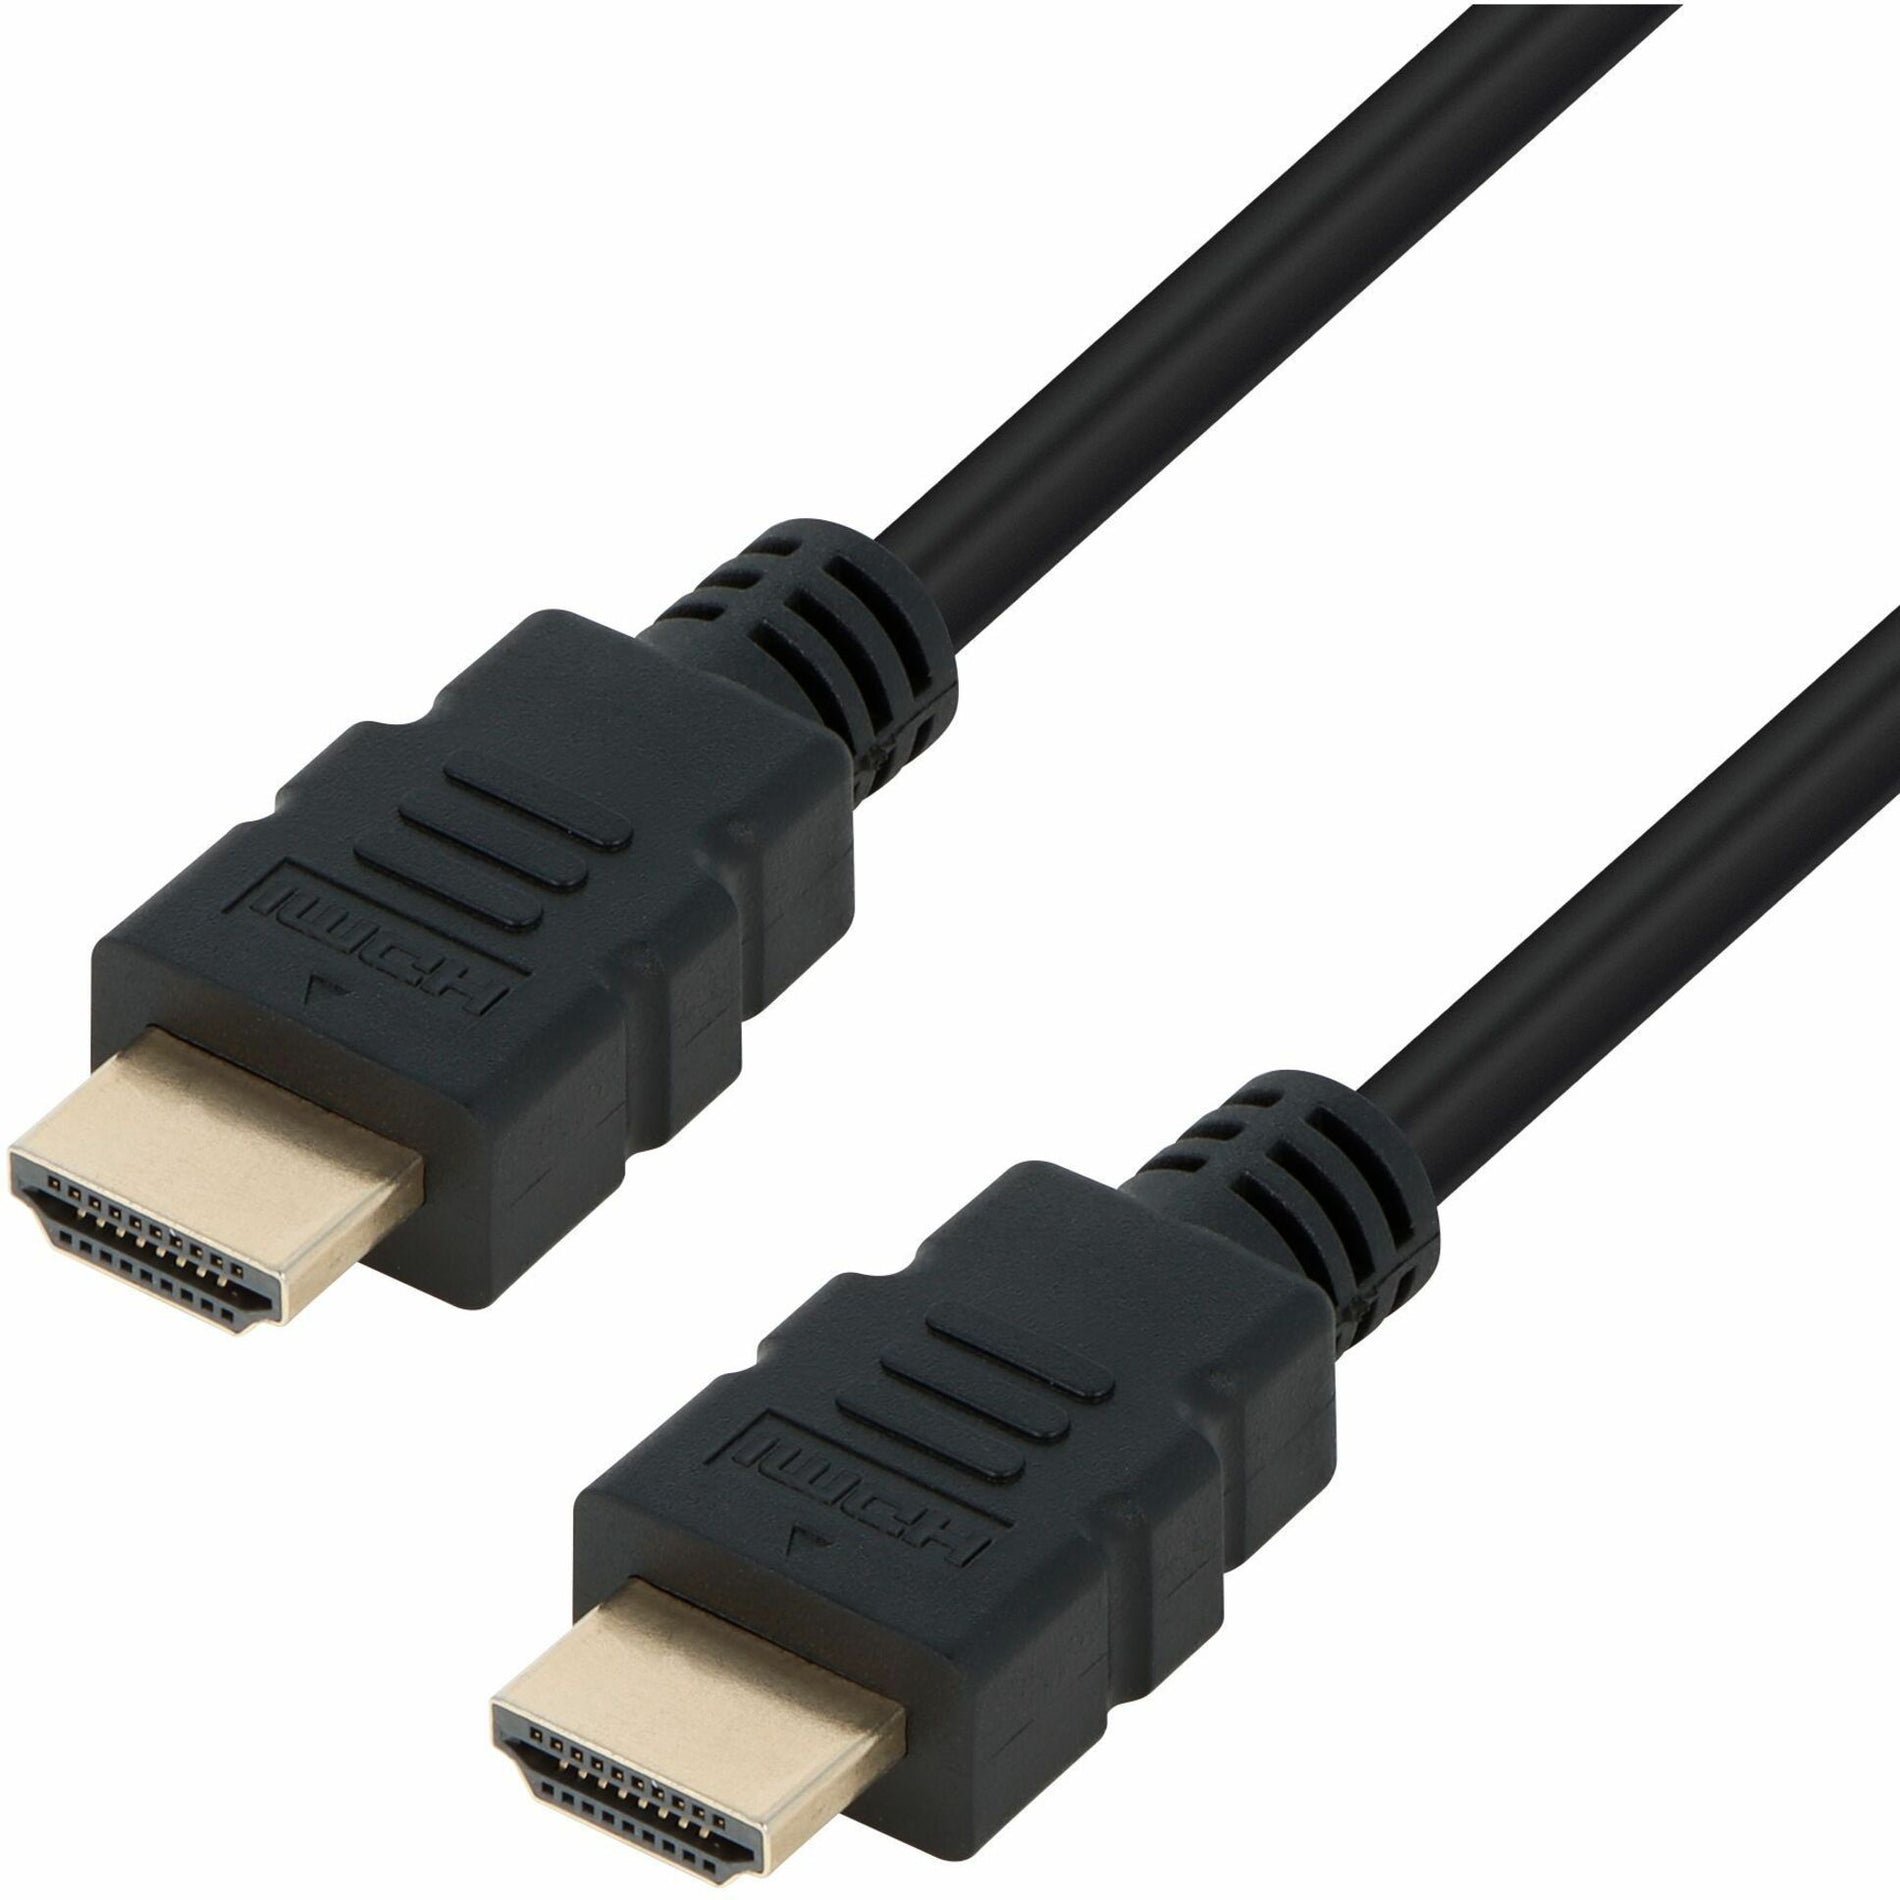 VisionTek 900661 HDMI 3 Foot Cable (M/M), Eyefinity Technology, Plug & Play, 4K Supported